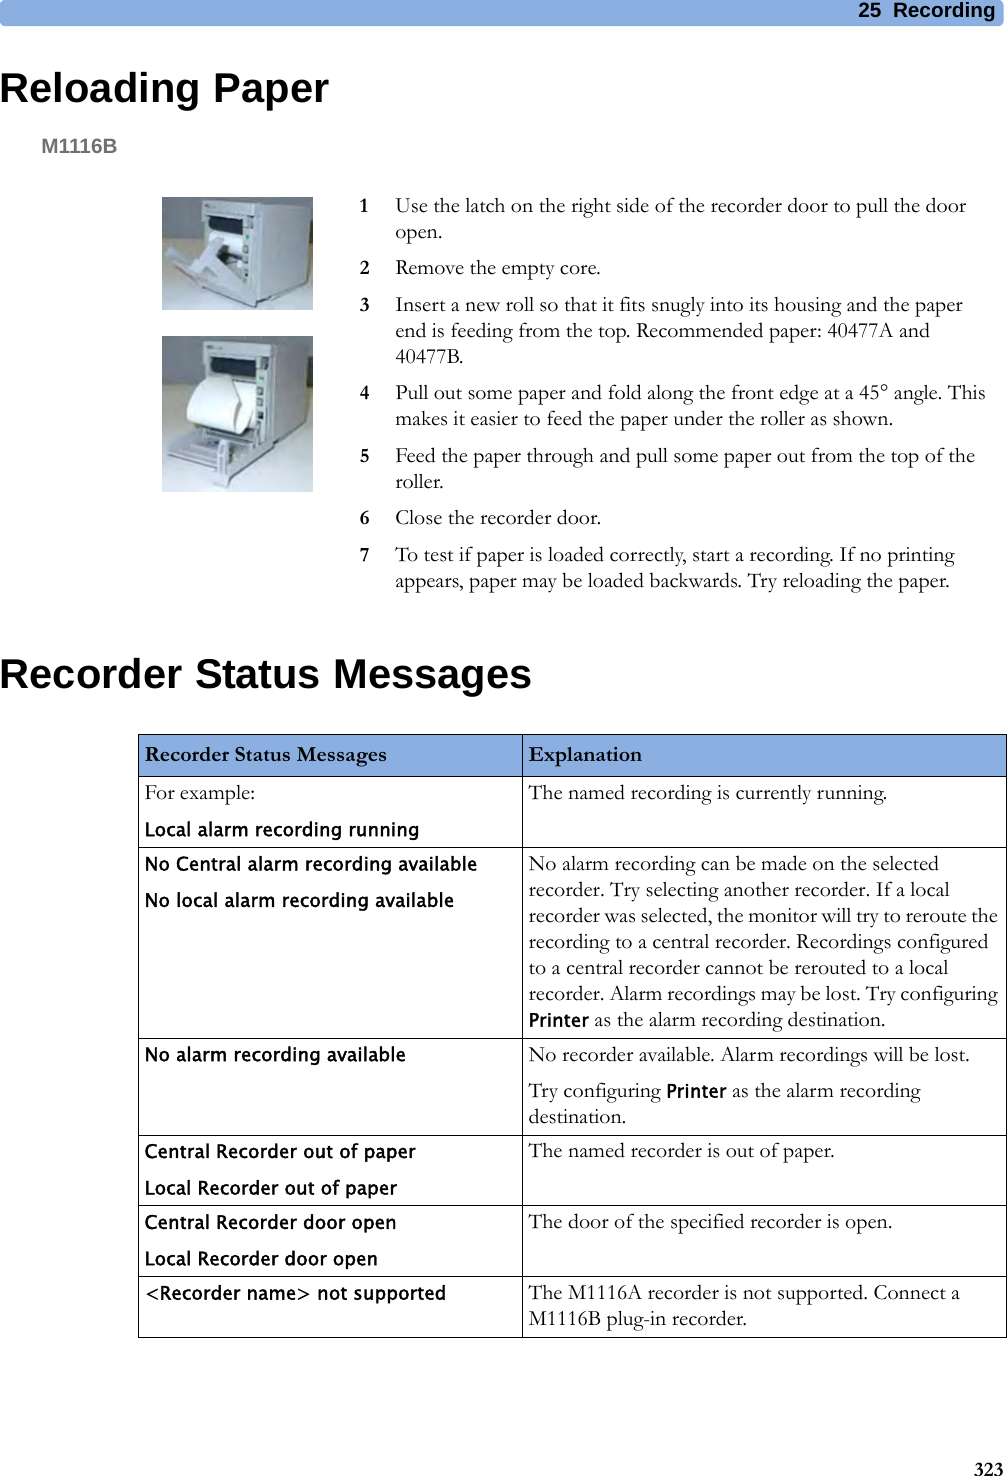 25 Recording323Reloading PaperM1116BRecorder Status Messages1Use the latch on the right side of the recorder door to pull the door open.2Remove the empty core.3Insert a new roll so that it fits snugly into its housing and the paper end is feeding from the top. Recommended paper: 40477A and 40477B.4Pull out some paper and fold along the front edge at a 45° angle. This makes it easier to feed the paper under the roller as shown.5Feed the paper through and pull some paper out from the top of the roller.6Close the recorder door.7To test if paper is loaded correctly, start a recording. If no printing appears, paper may be loaded backwards. Try reloading the paper.Recorder Status Messages ExplanationFor example:Local alarm recording runningThe named recording is currently running.No Central alarm recording availableNo local alarm recording availableNo alarm recording can be made on the selected recorder. Try selecting another recorder. If a local recorder was selected, the monitor will try to reroute the recording to a central recorder. Recordings configured to a central recorder cannot be rerouted to a local recorder. Alarm recordings may be lost. Try configuring Printer as the alarm recording destination.No alarm recording available No recorder available. Alarm recordings will be lost.Try configuring Printer as the alarm recording destination.Central Recorder out of paperLocal Recorder out of paperThe named recorder is out of paper.Central Recorder door openLocal Recorder door openThe door of the specified recorder is open.&lt;Recorder name&gt; not supported The M1116A recorder is not supported. Connect a M1116B plug-in recorder.